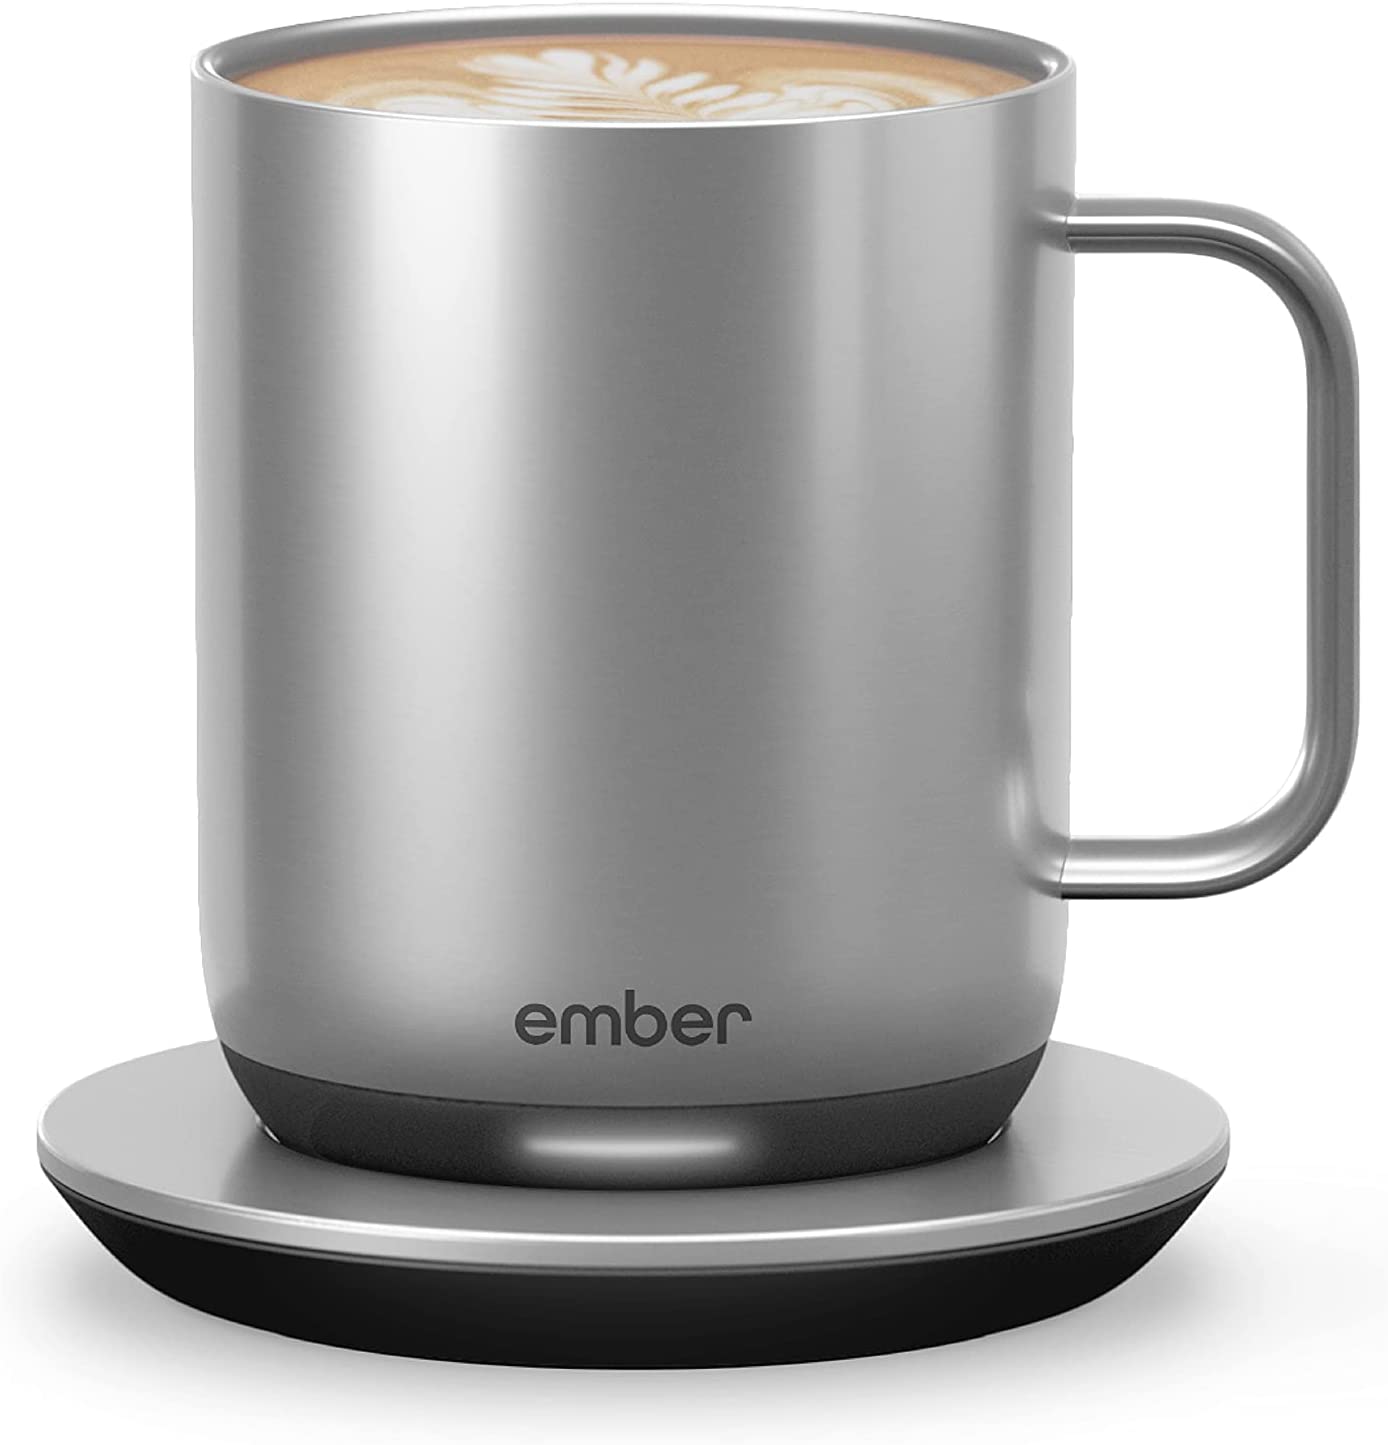 Ember - Temperature Control Smart Coffee Mug² - 10oz Stainless Steel